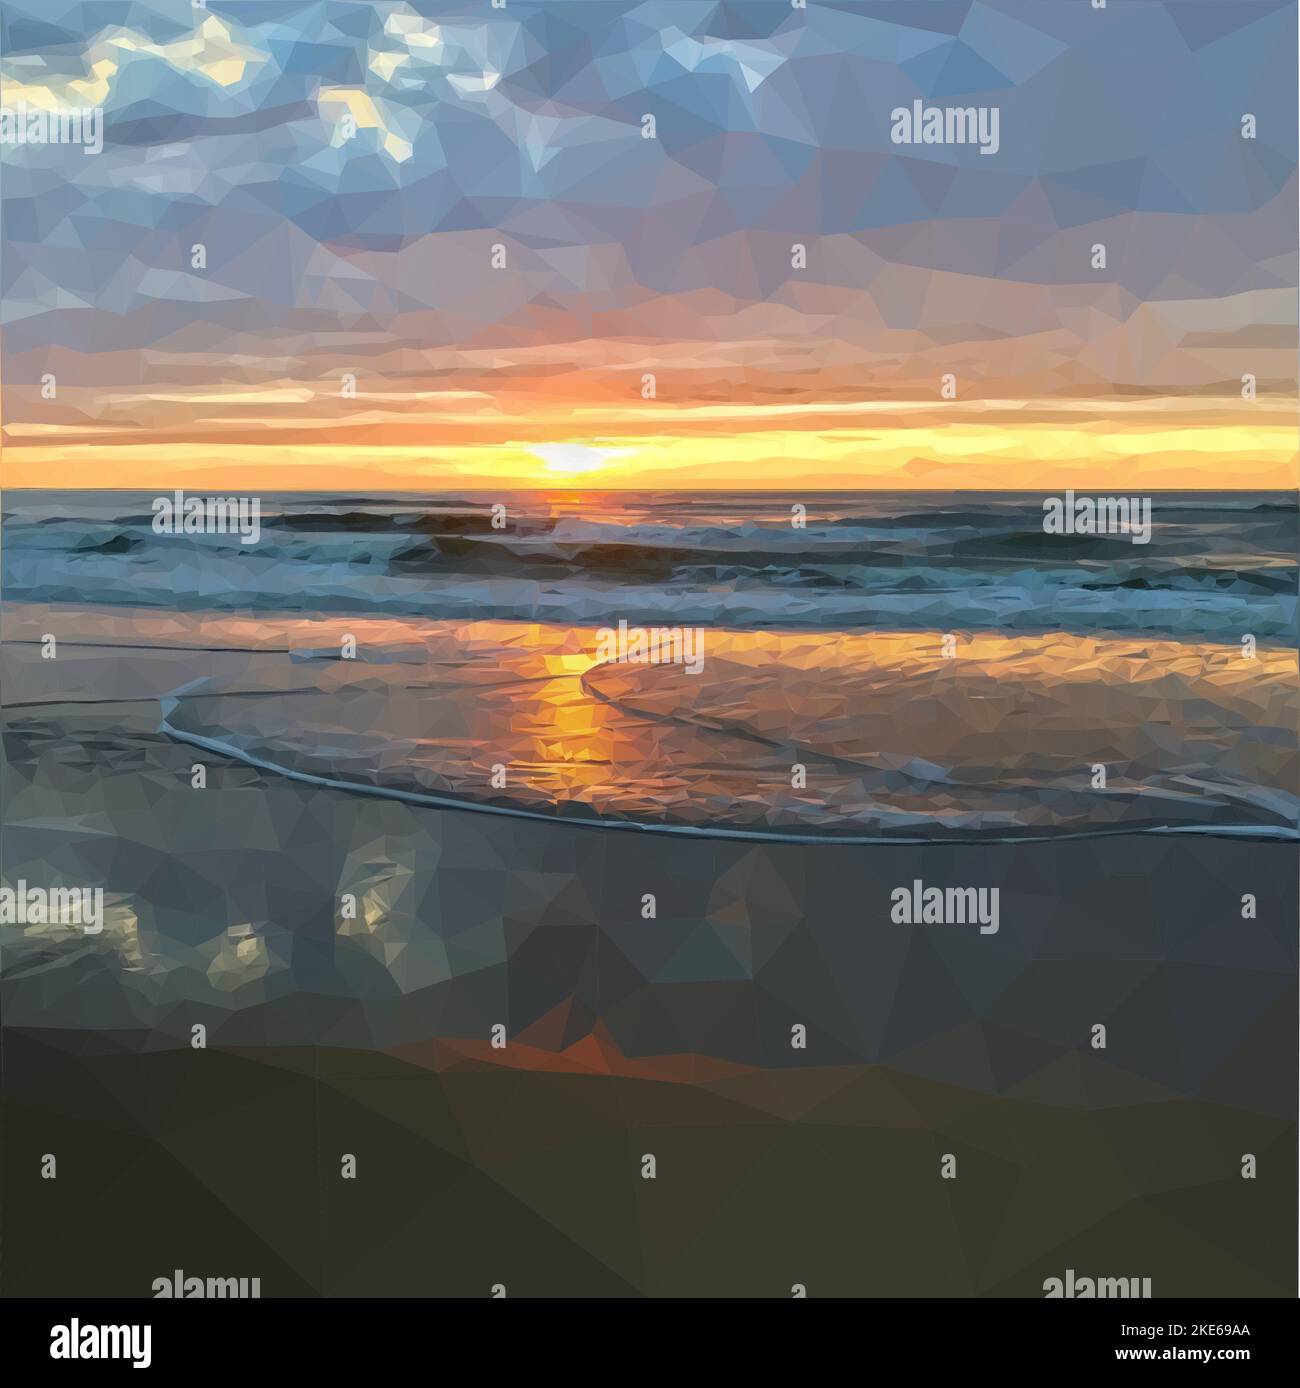 Sunset by the sea. The tide is coming in and waves are washing up on the sandy beach. Seen at the North Sea. Vector in Low Poly Art. Stock Vector